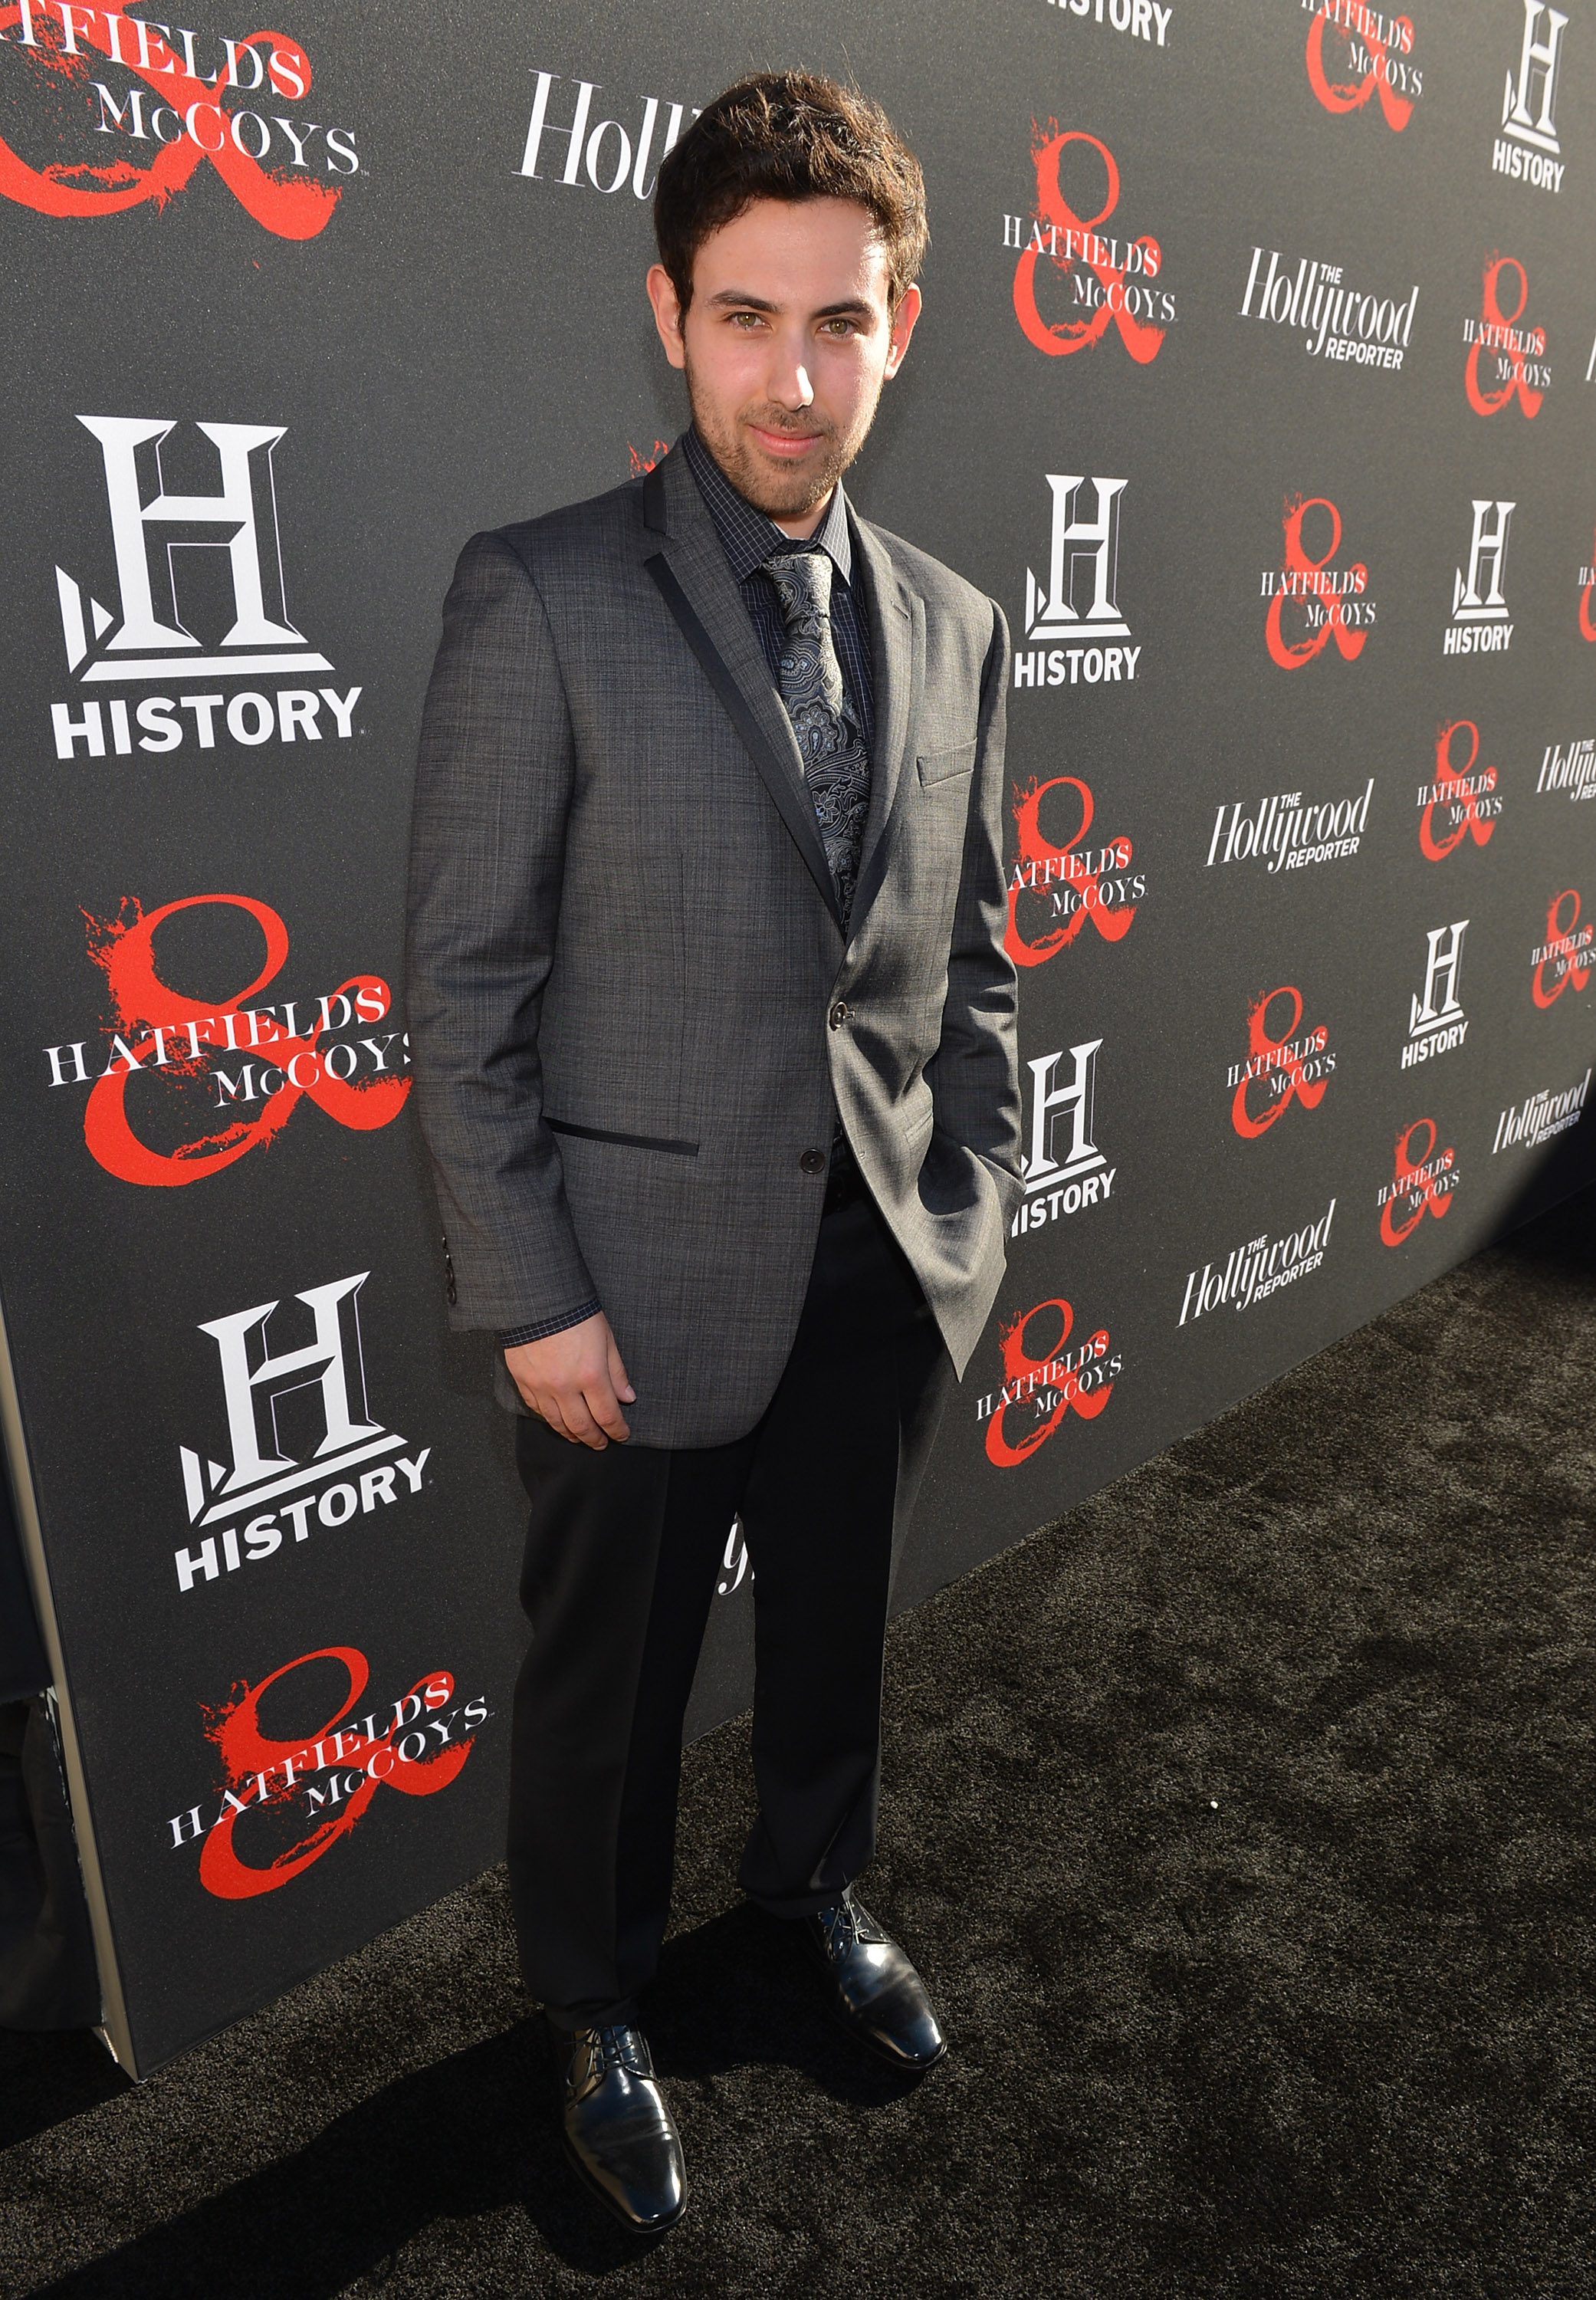 Jon Bloch attends a special screening of 'Hatfields & McCoys' hosted by The History Channel at Milk Studios.